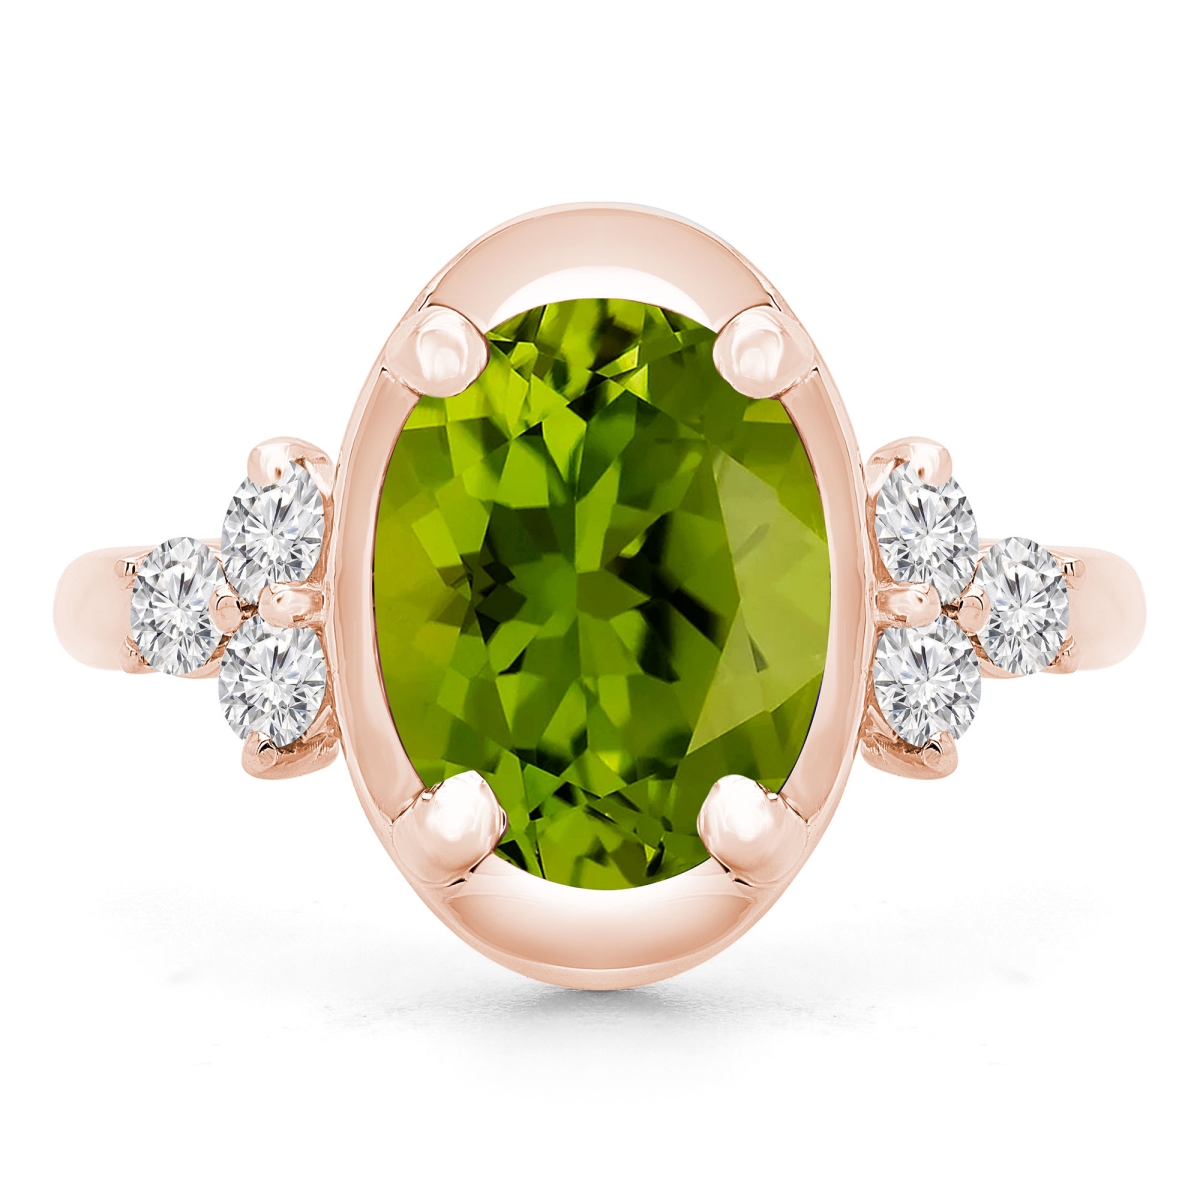 Picture of Majesty Diamonds MD190412-7.5 3.9 CTW Oval Green Peridot Cocktail Ring in 14K Rose Gold - Size 7.5